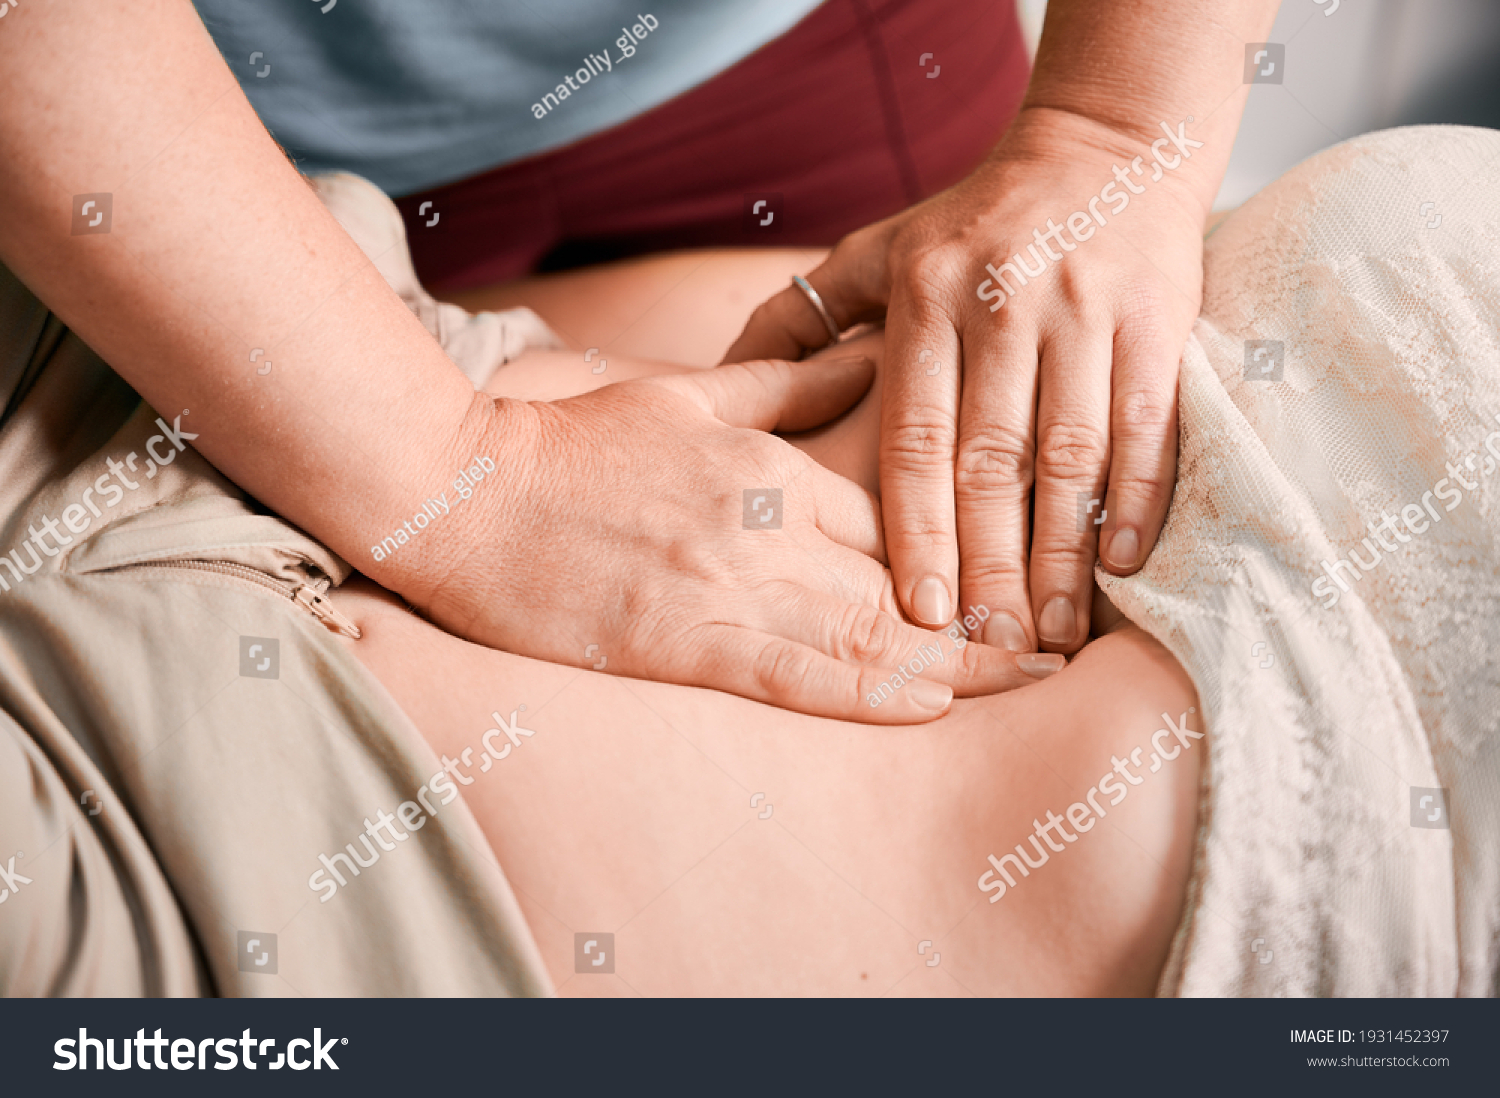 Close up of physician hands massaging woman abdomen during medical examination. Doctor examining patient stomach in clinic. Concept of healthcare, therapeutic massage and medical examination. #1931452397